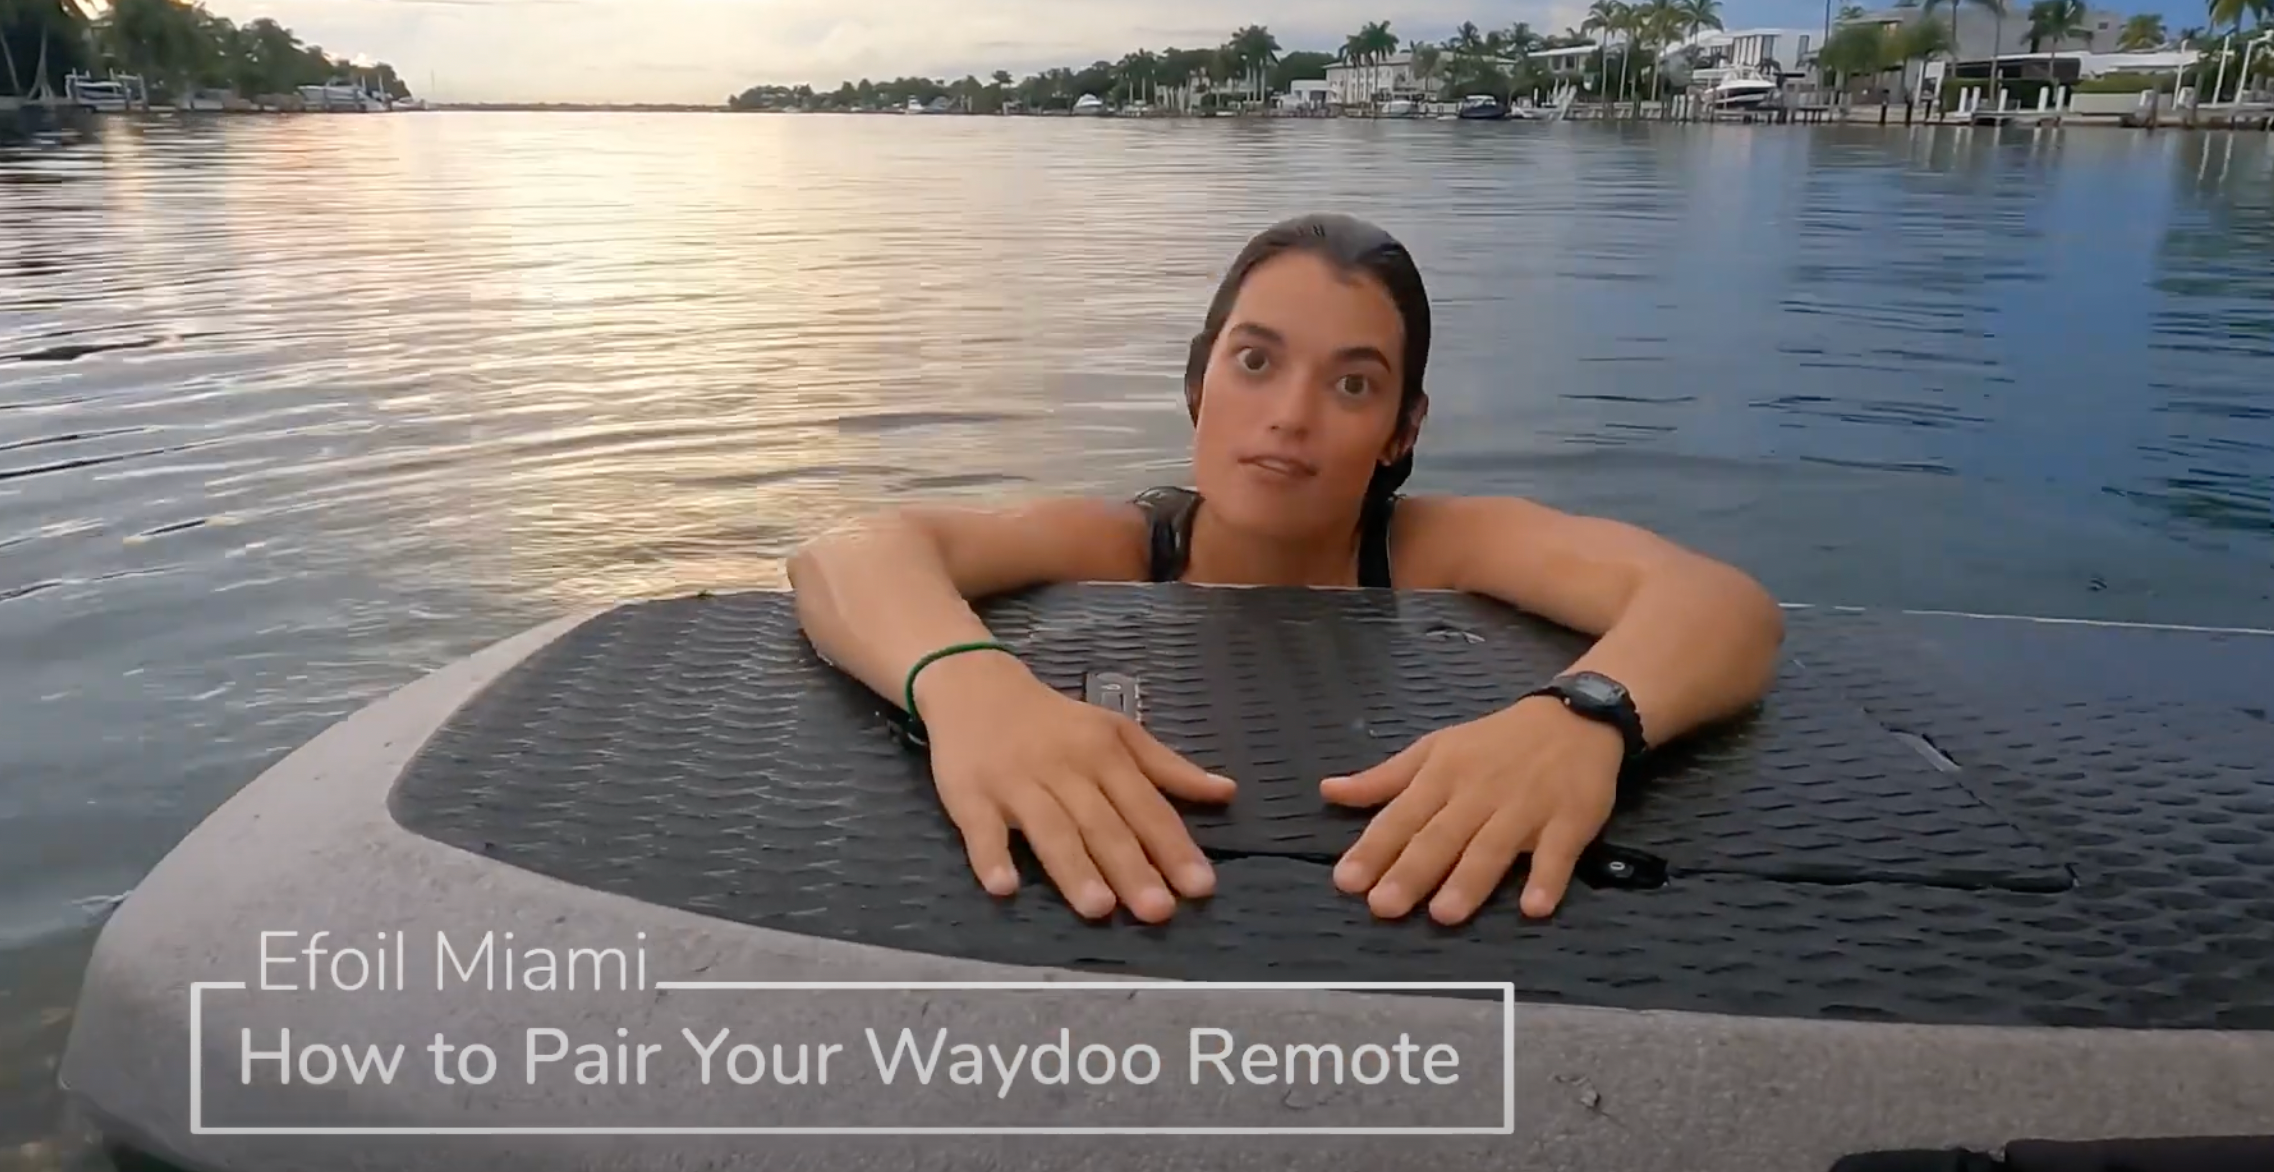 How to Pair your Waydoo Remote